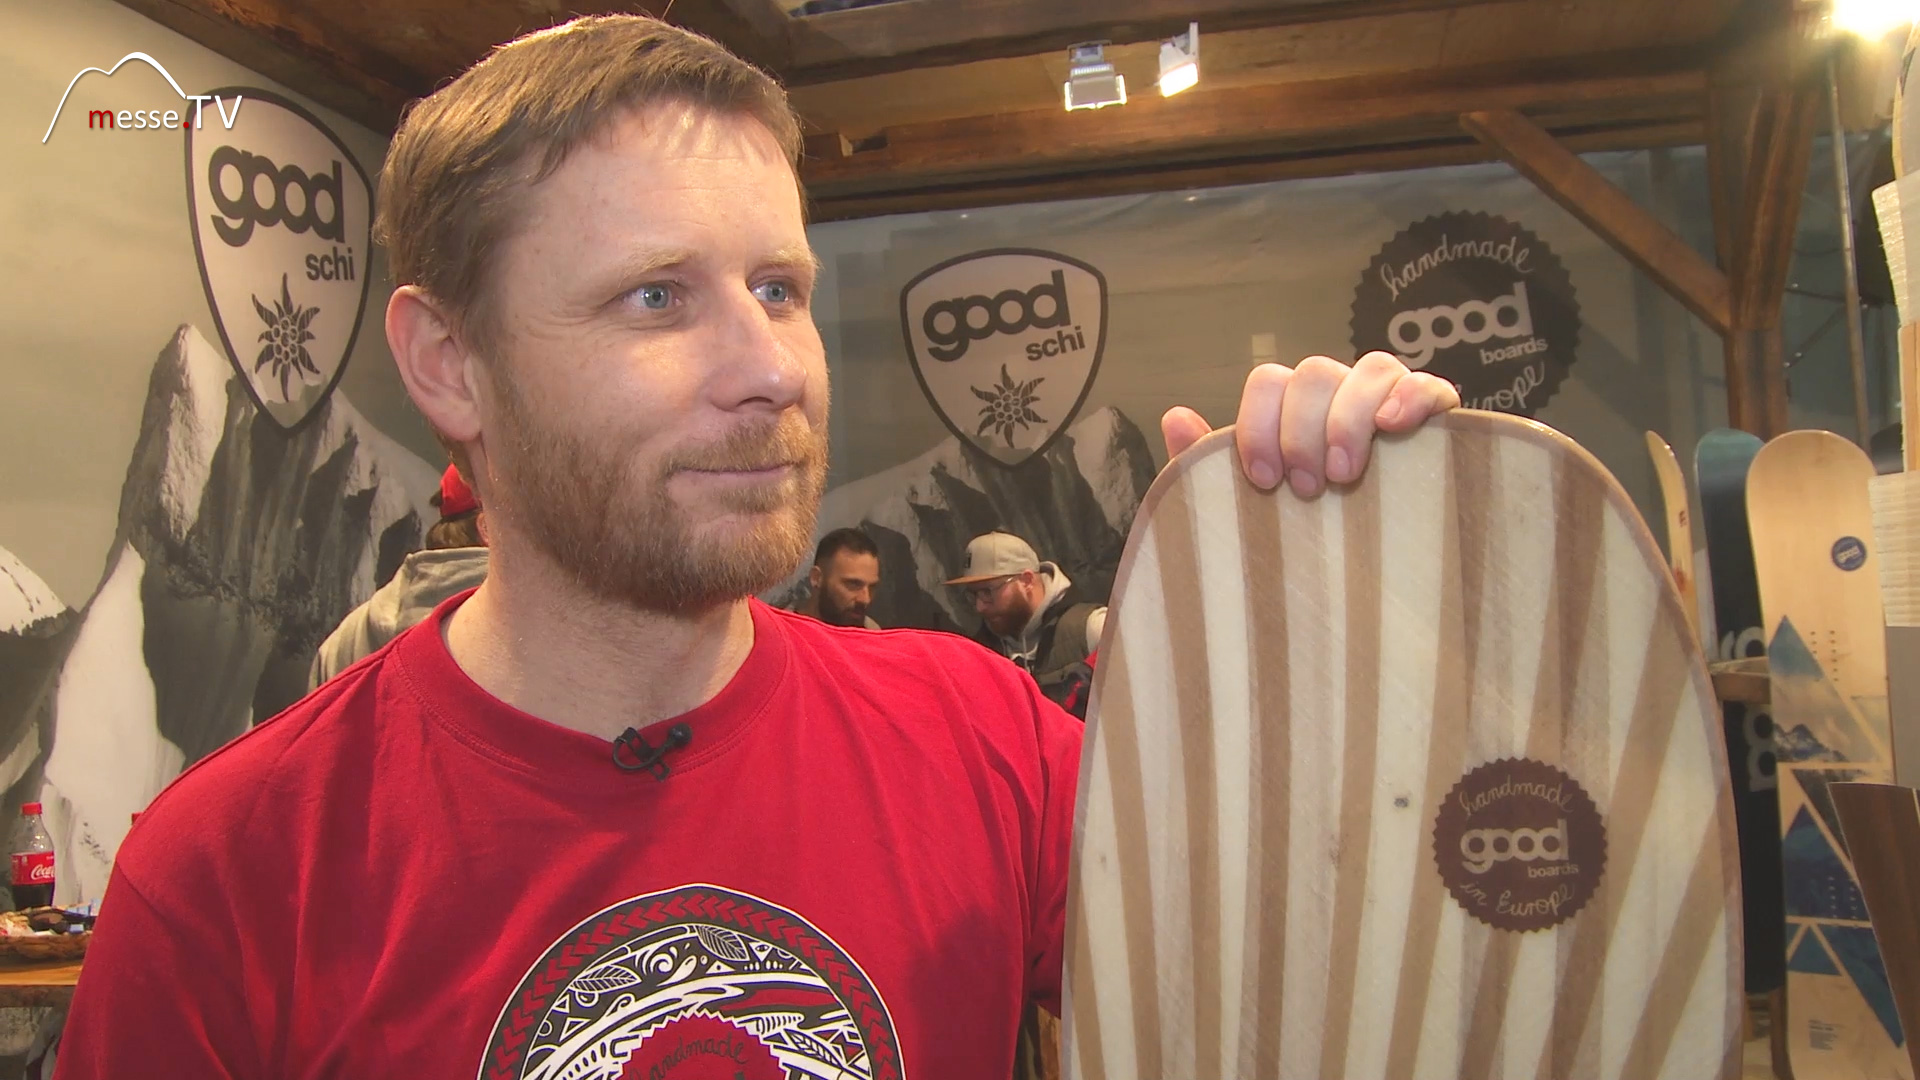 Award Rotor wooden oldstyle Good Boards Ispo Muenchen